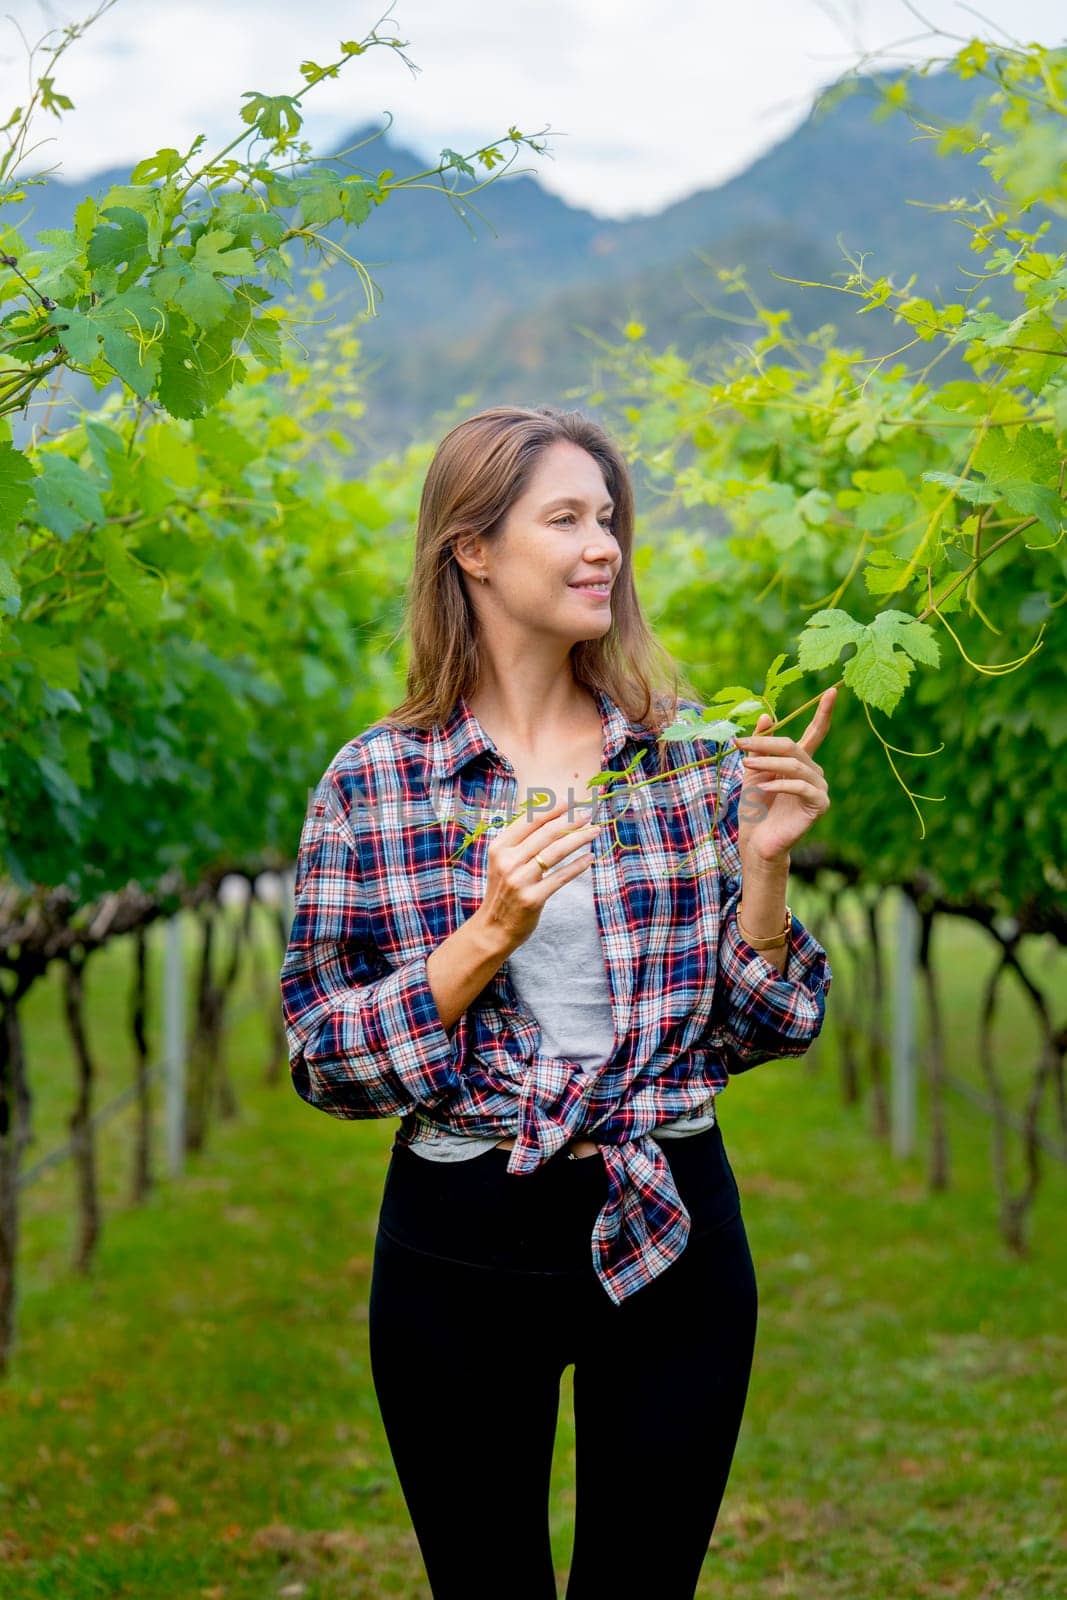 Vertical image of winery worker or farmer woman walk and check grape vine in the yard or field with day light and she look happy during working.